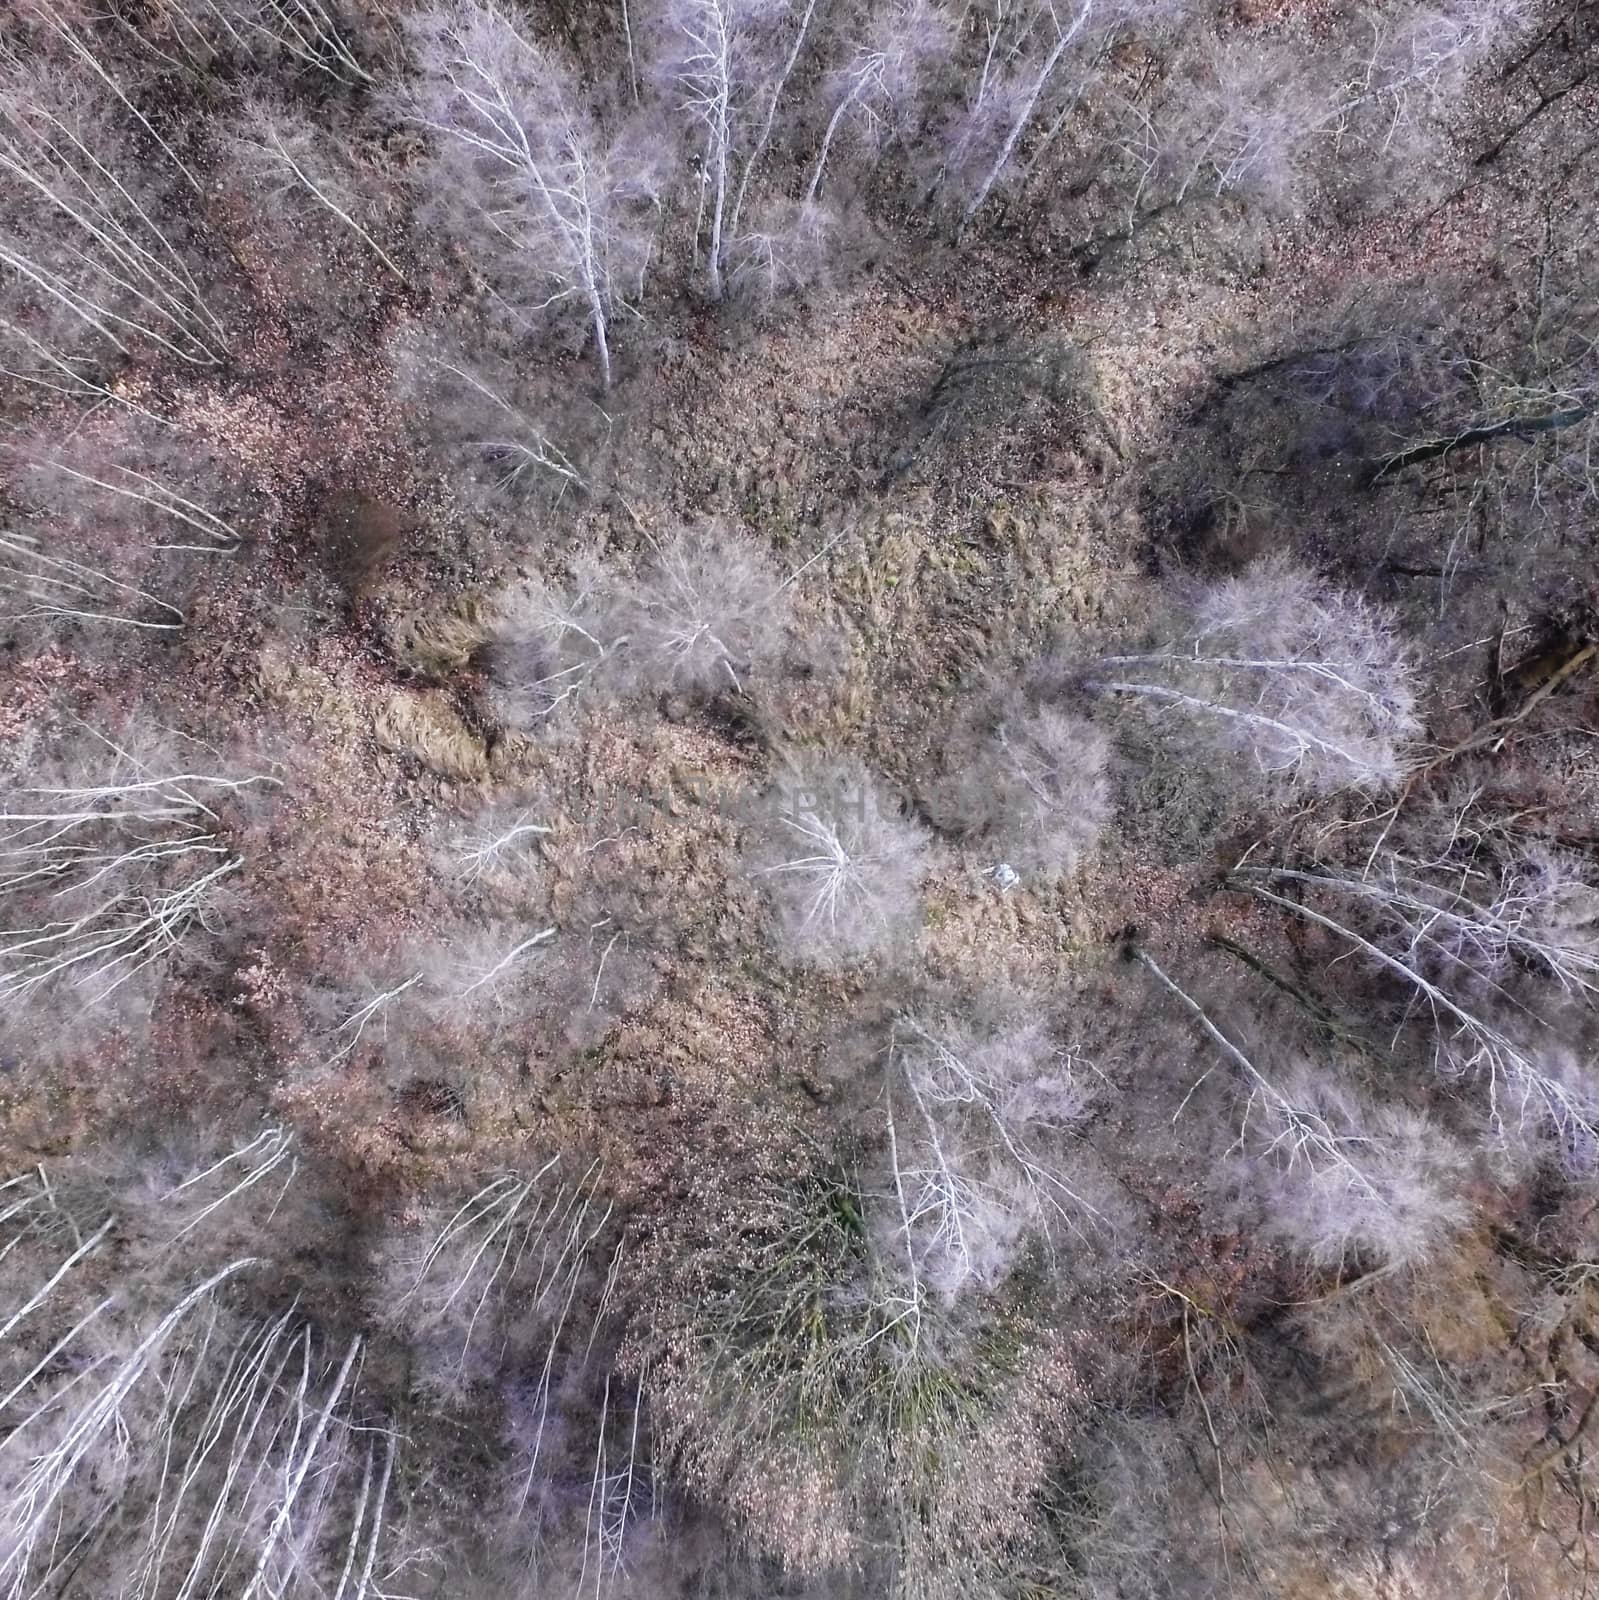 Abstract aerial photograph of leafless trees, taken vertically, distorted by geogif